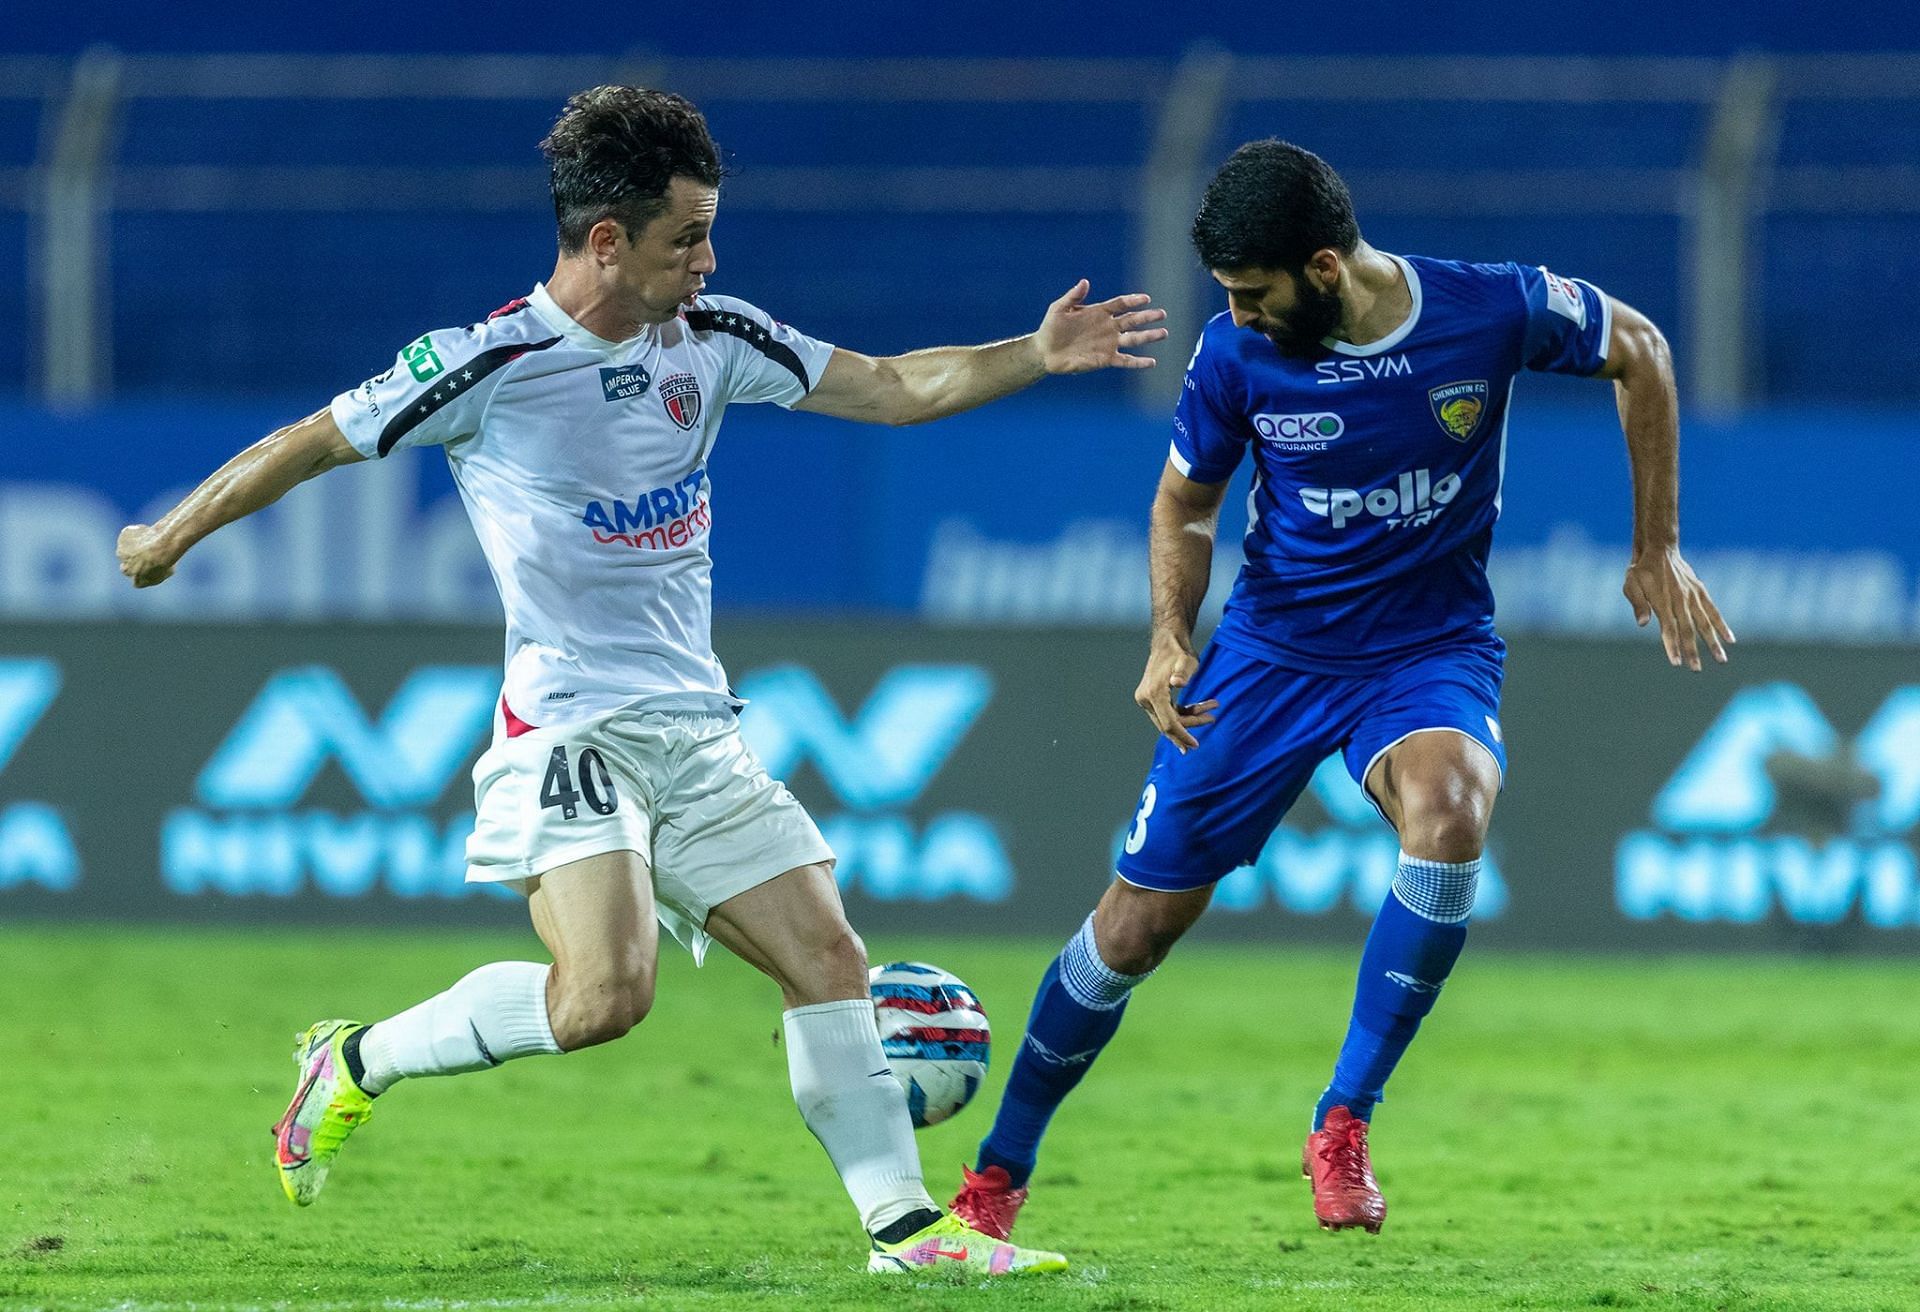 Marcelinho showed glimpses of his class in the second half (Image courtesy: ISL social media)